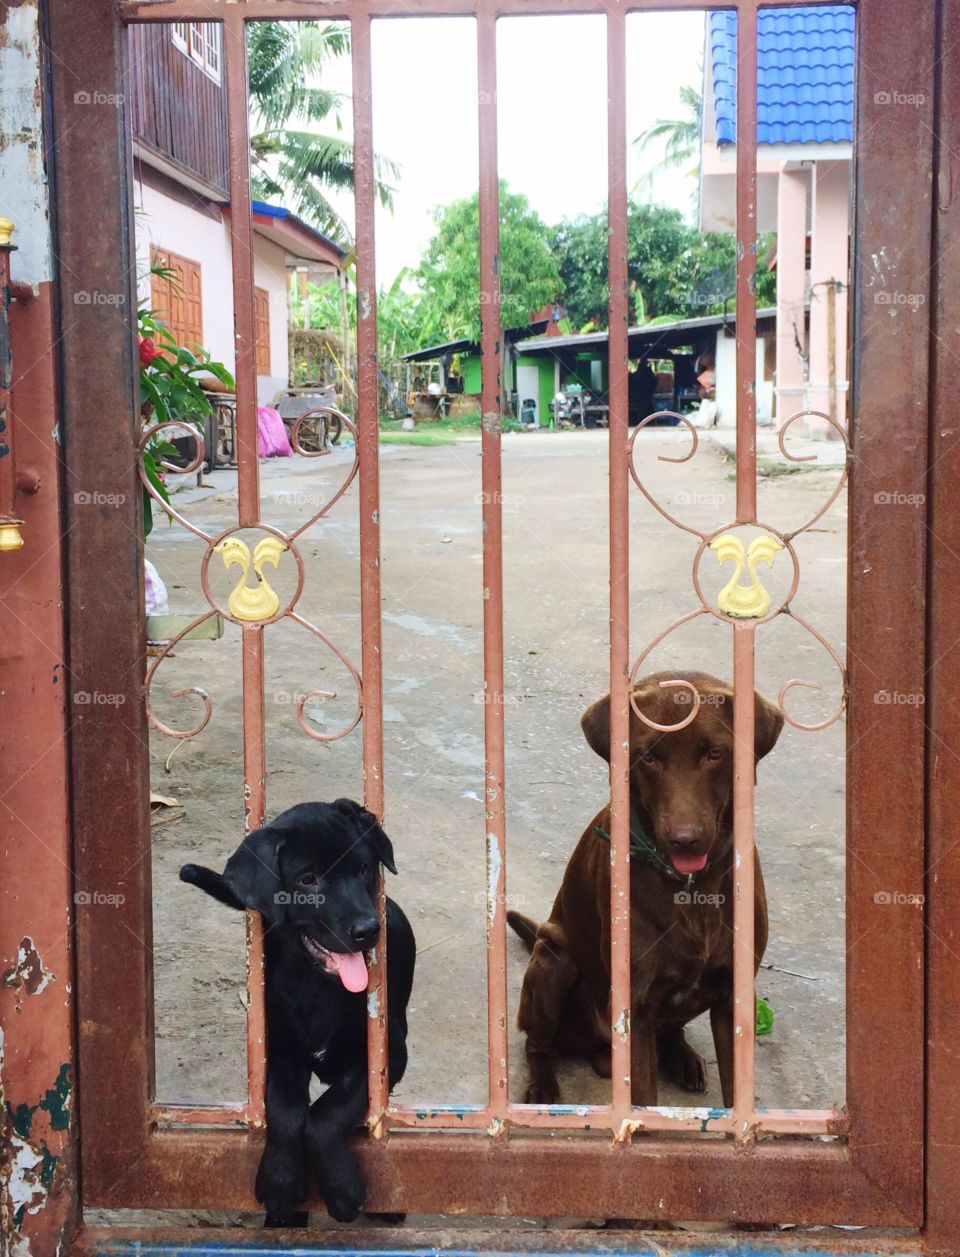 My dogs at the gate want to follow me 